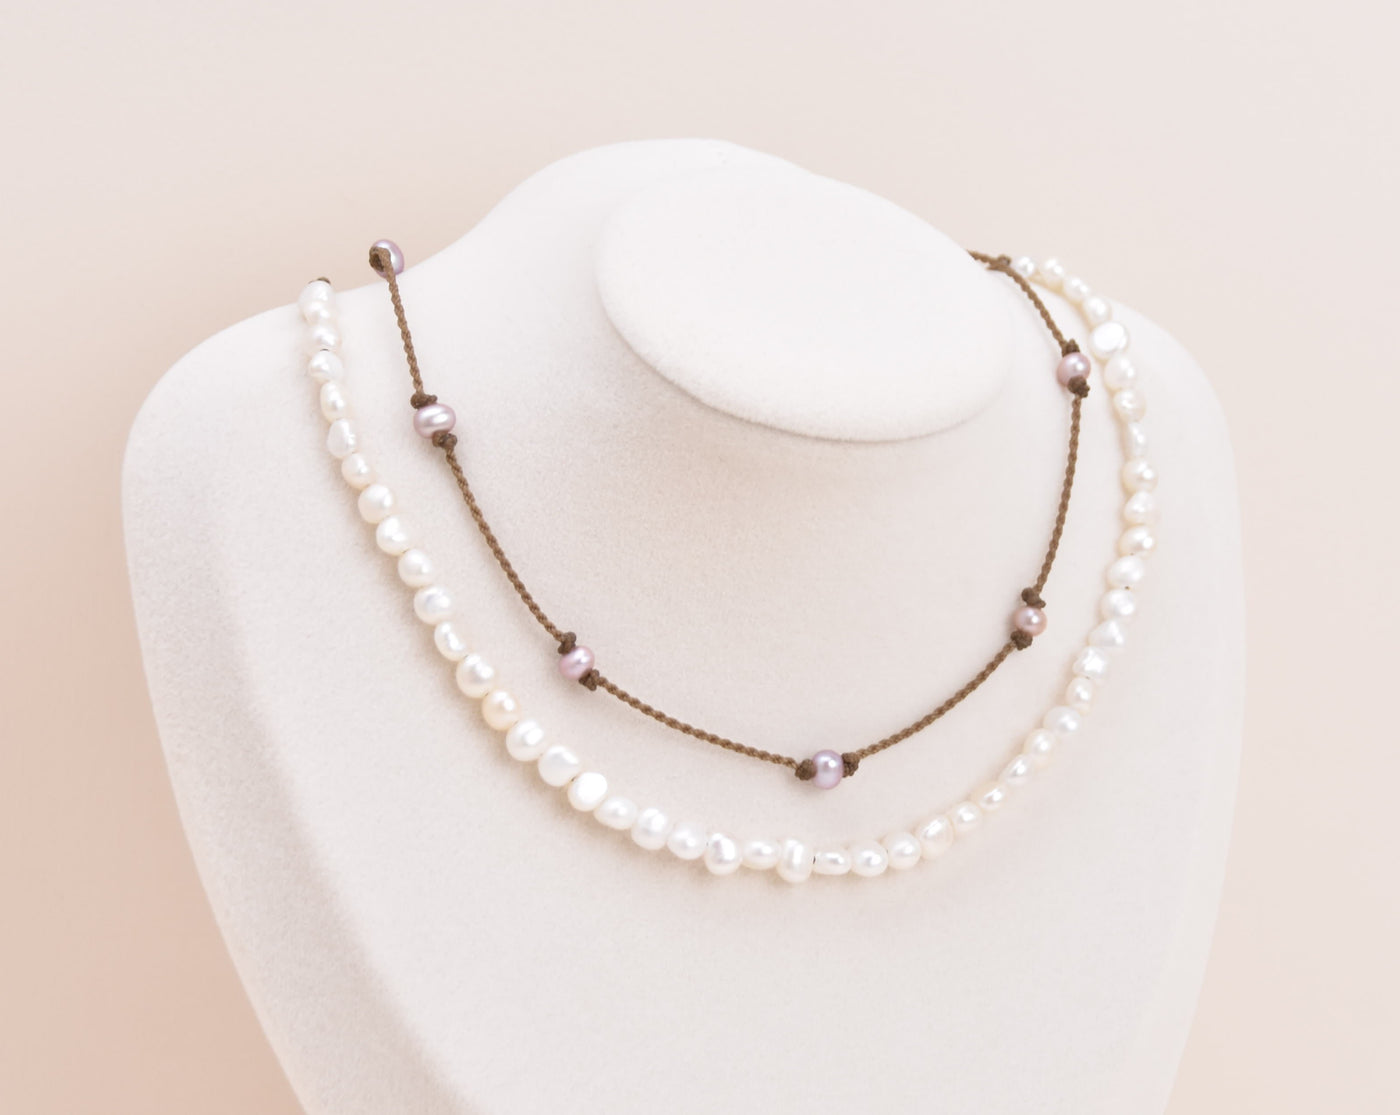 My Girl - Necklace Stack (10% off)